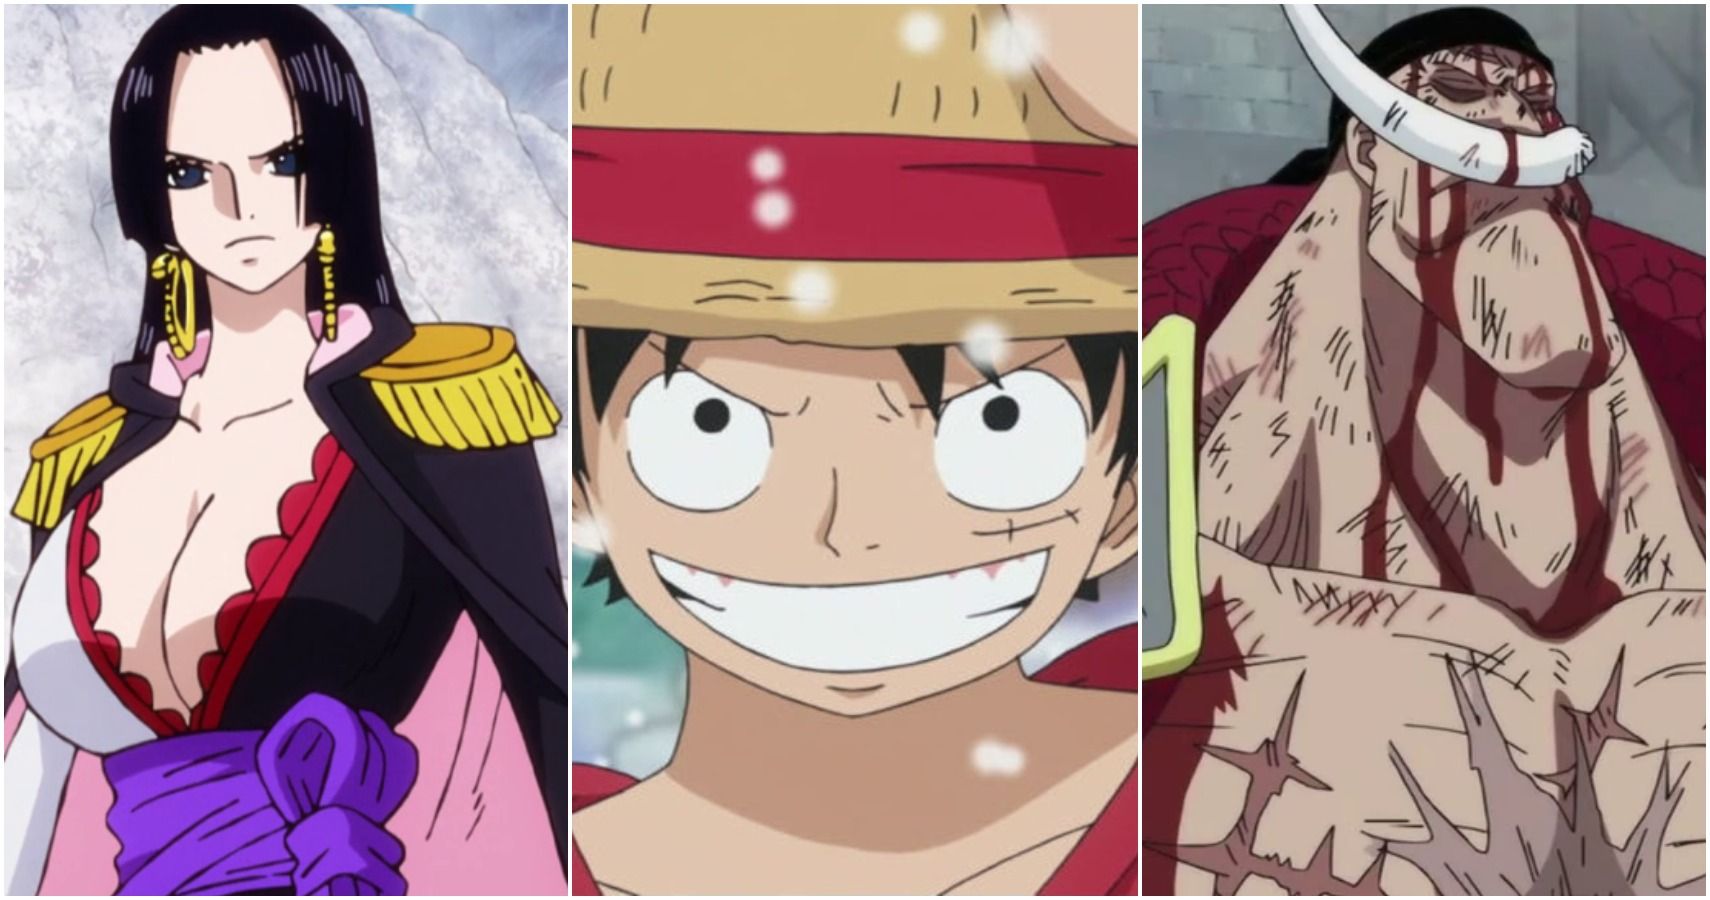 Top 10 Strongest Characters in One Piece